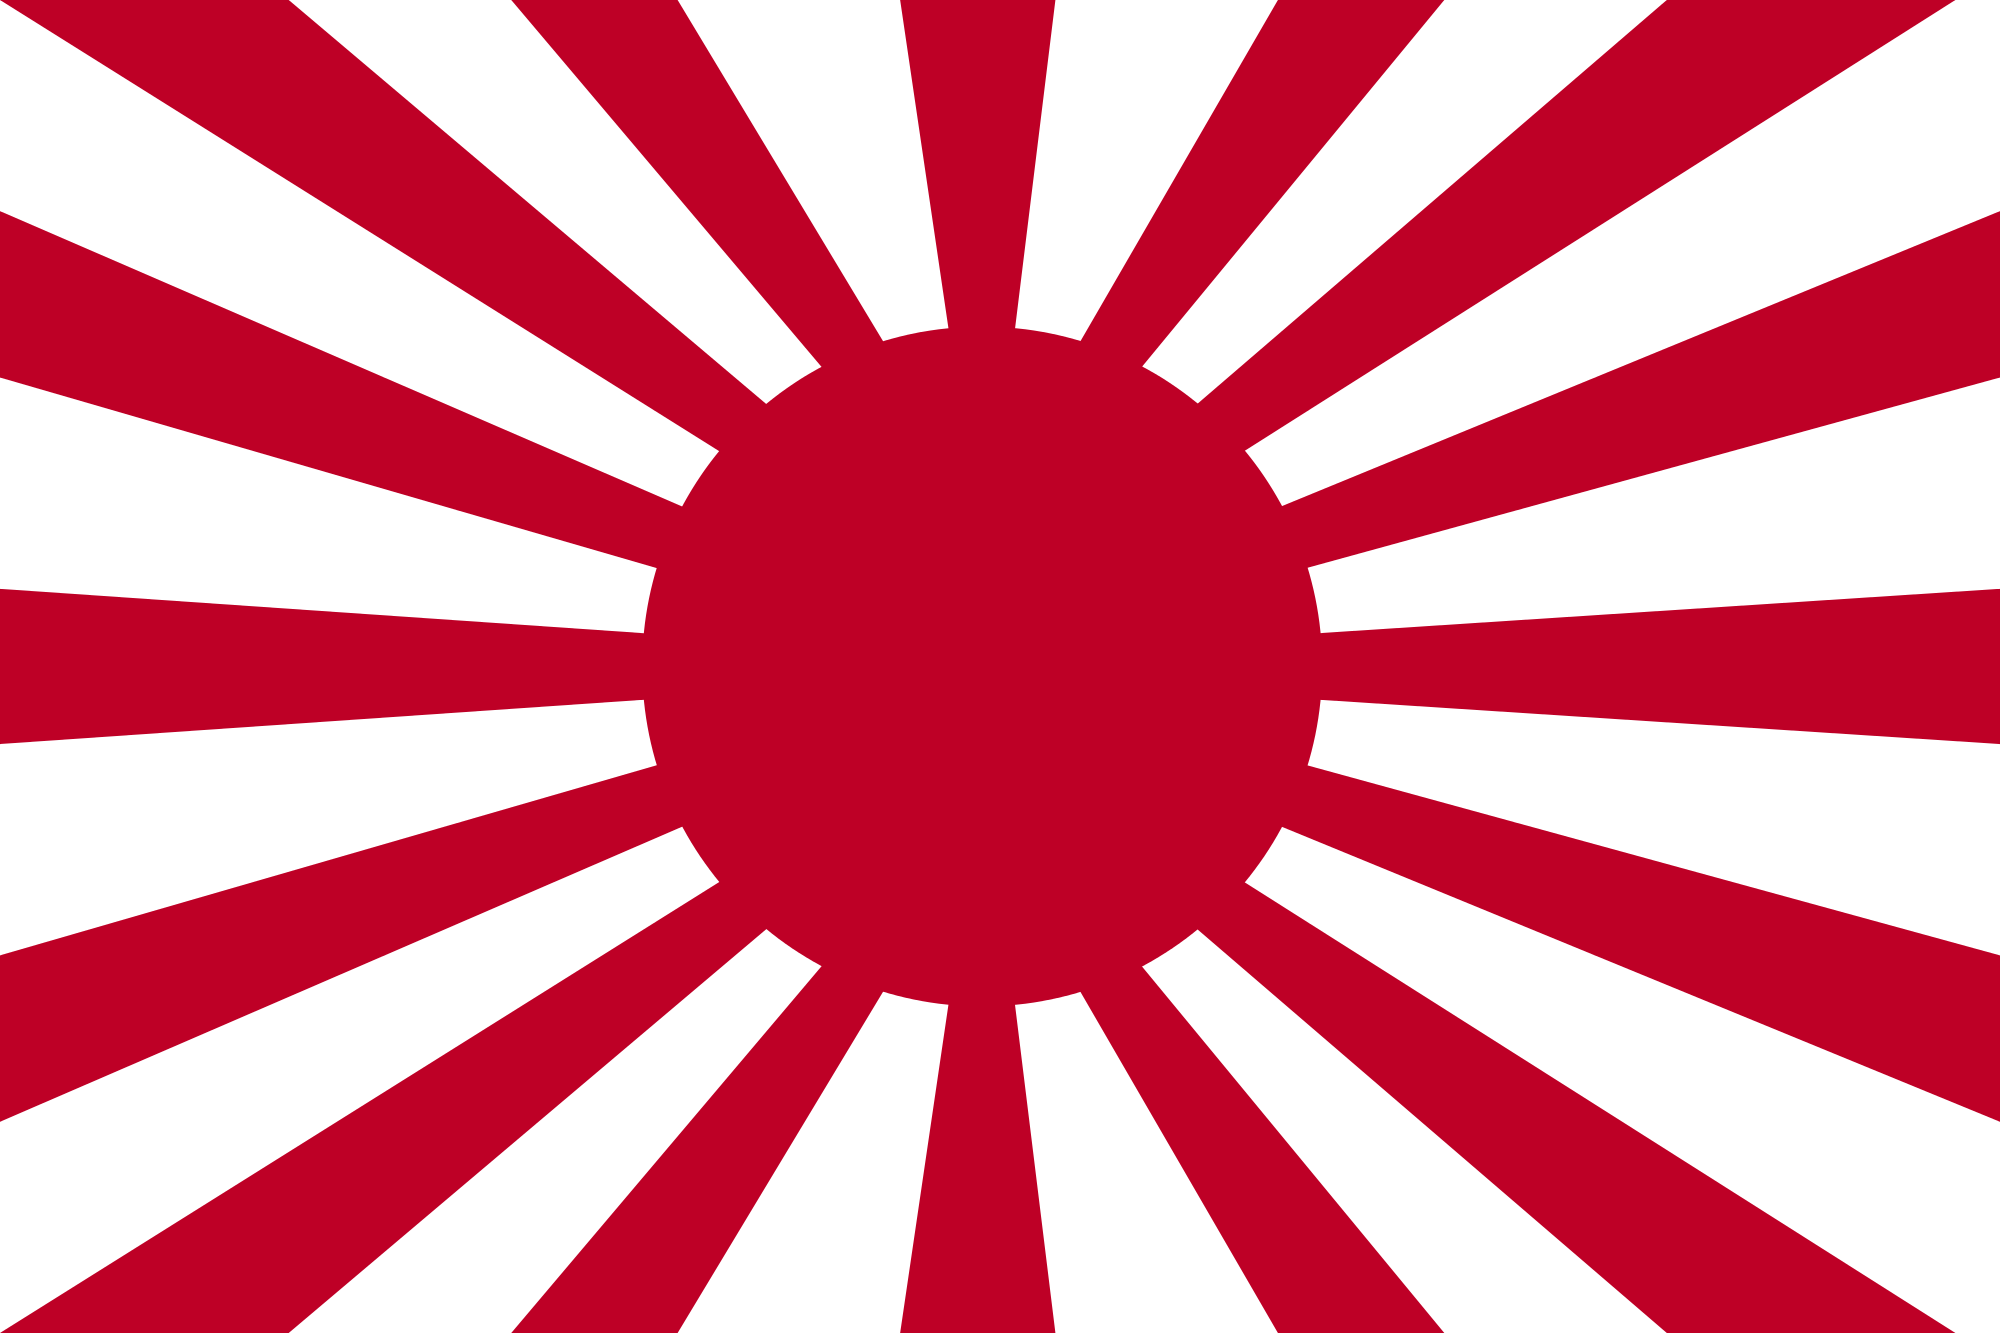 File:War flag of the Imperial Japanese Army.svg - Wikimedia Commons